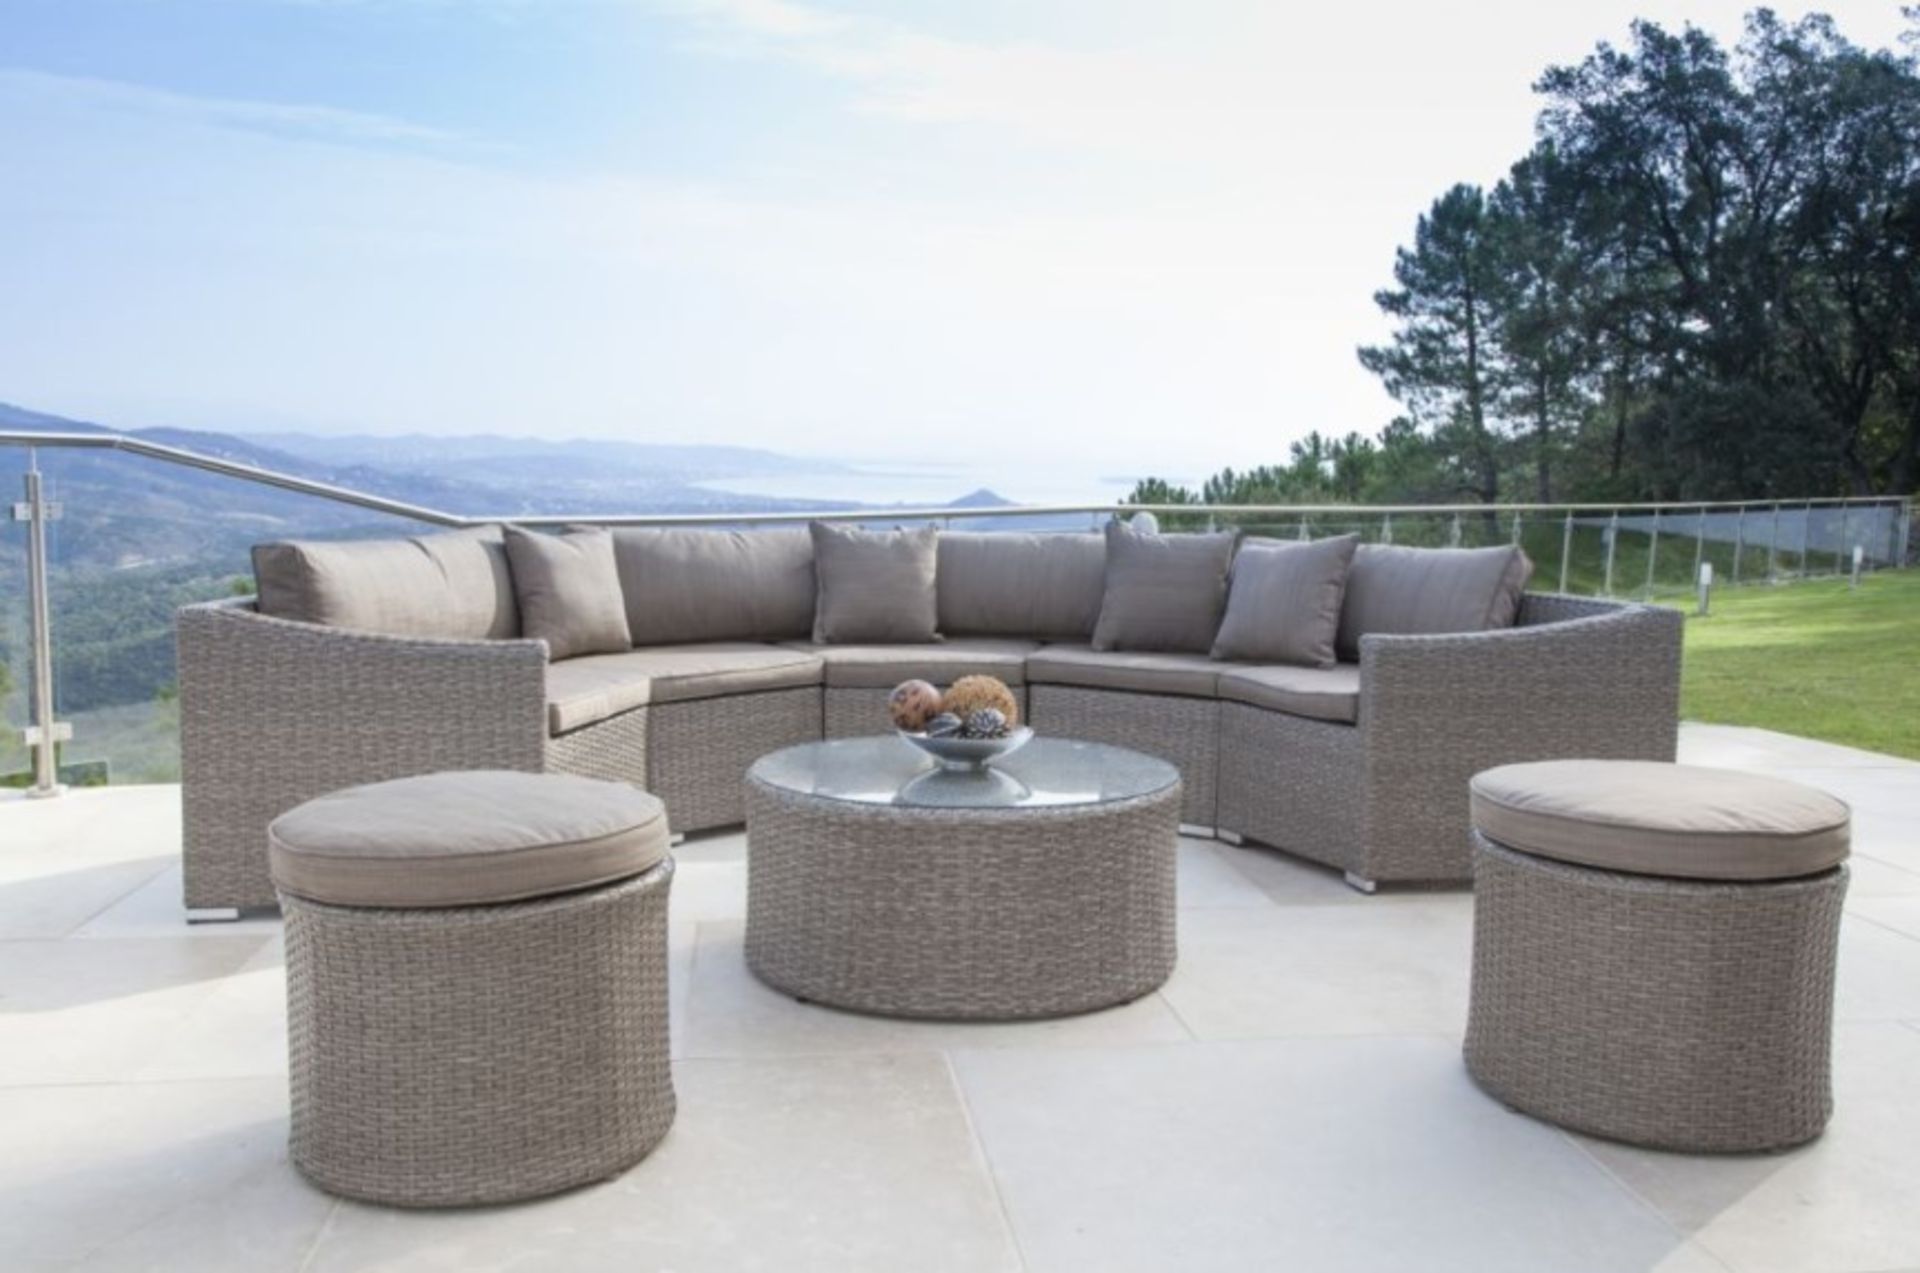 * The Mexico Curved Ratten Garden Sofa Set - Image 2 of 3